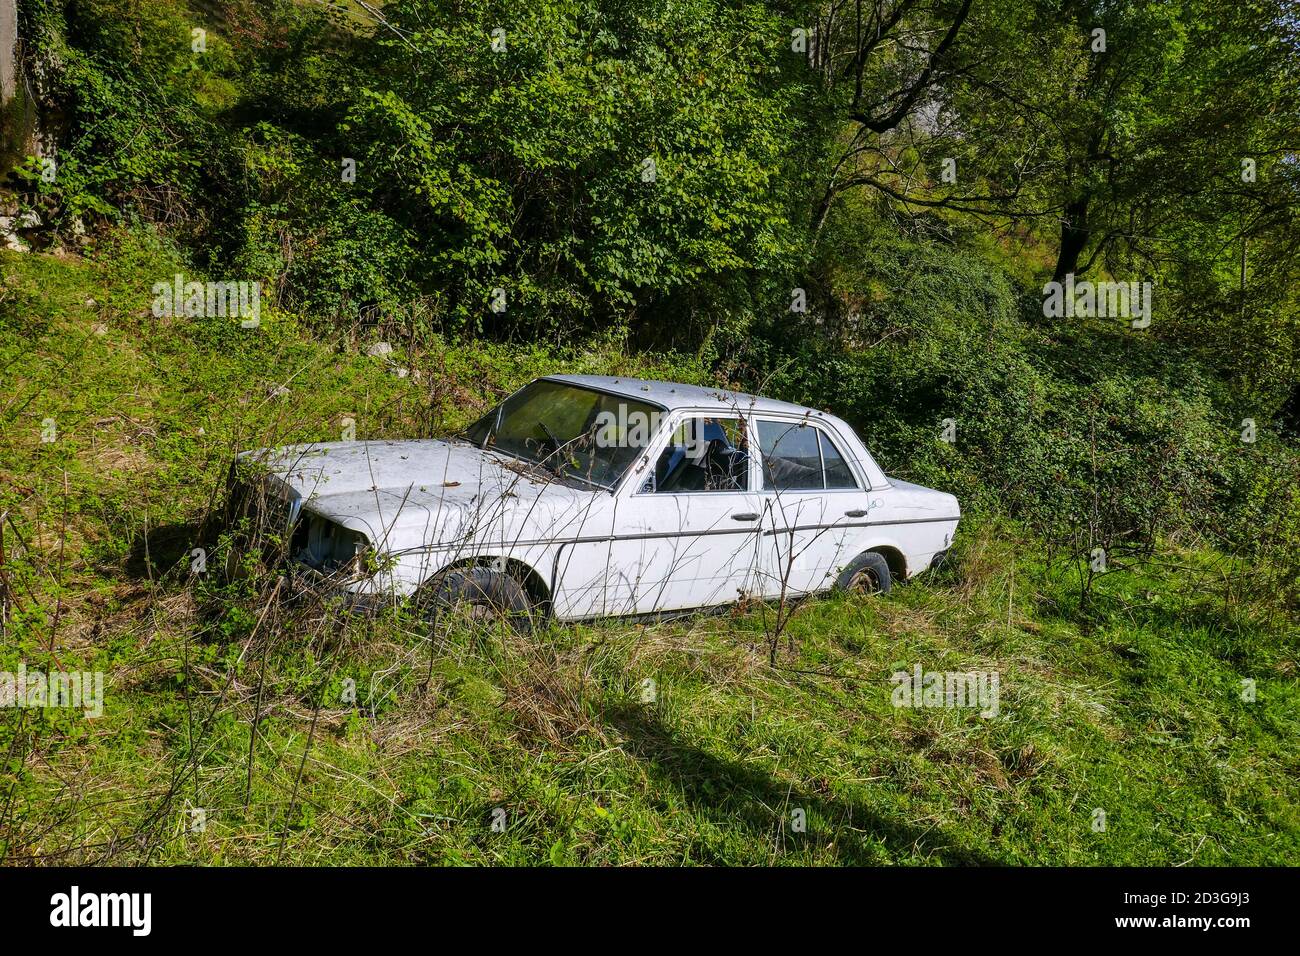 Old, abandoned white Mercedes Benz car surrounded by grass, near the village of Genat, Tarascon sur Ariege, Ariege, France Stock Photo